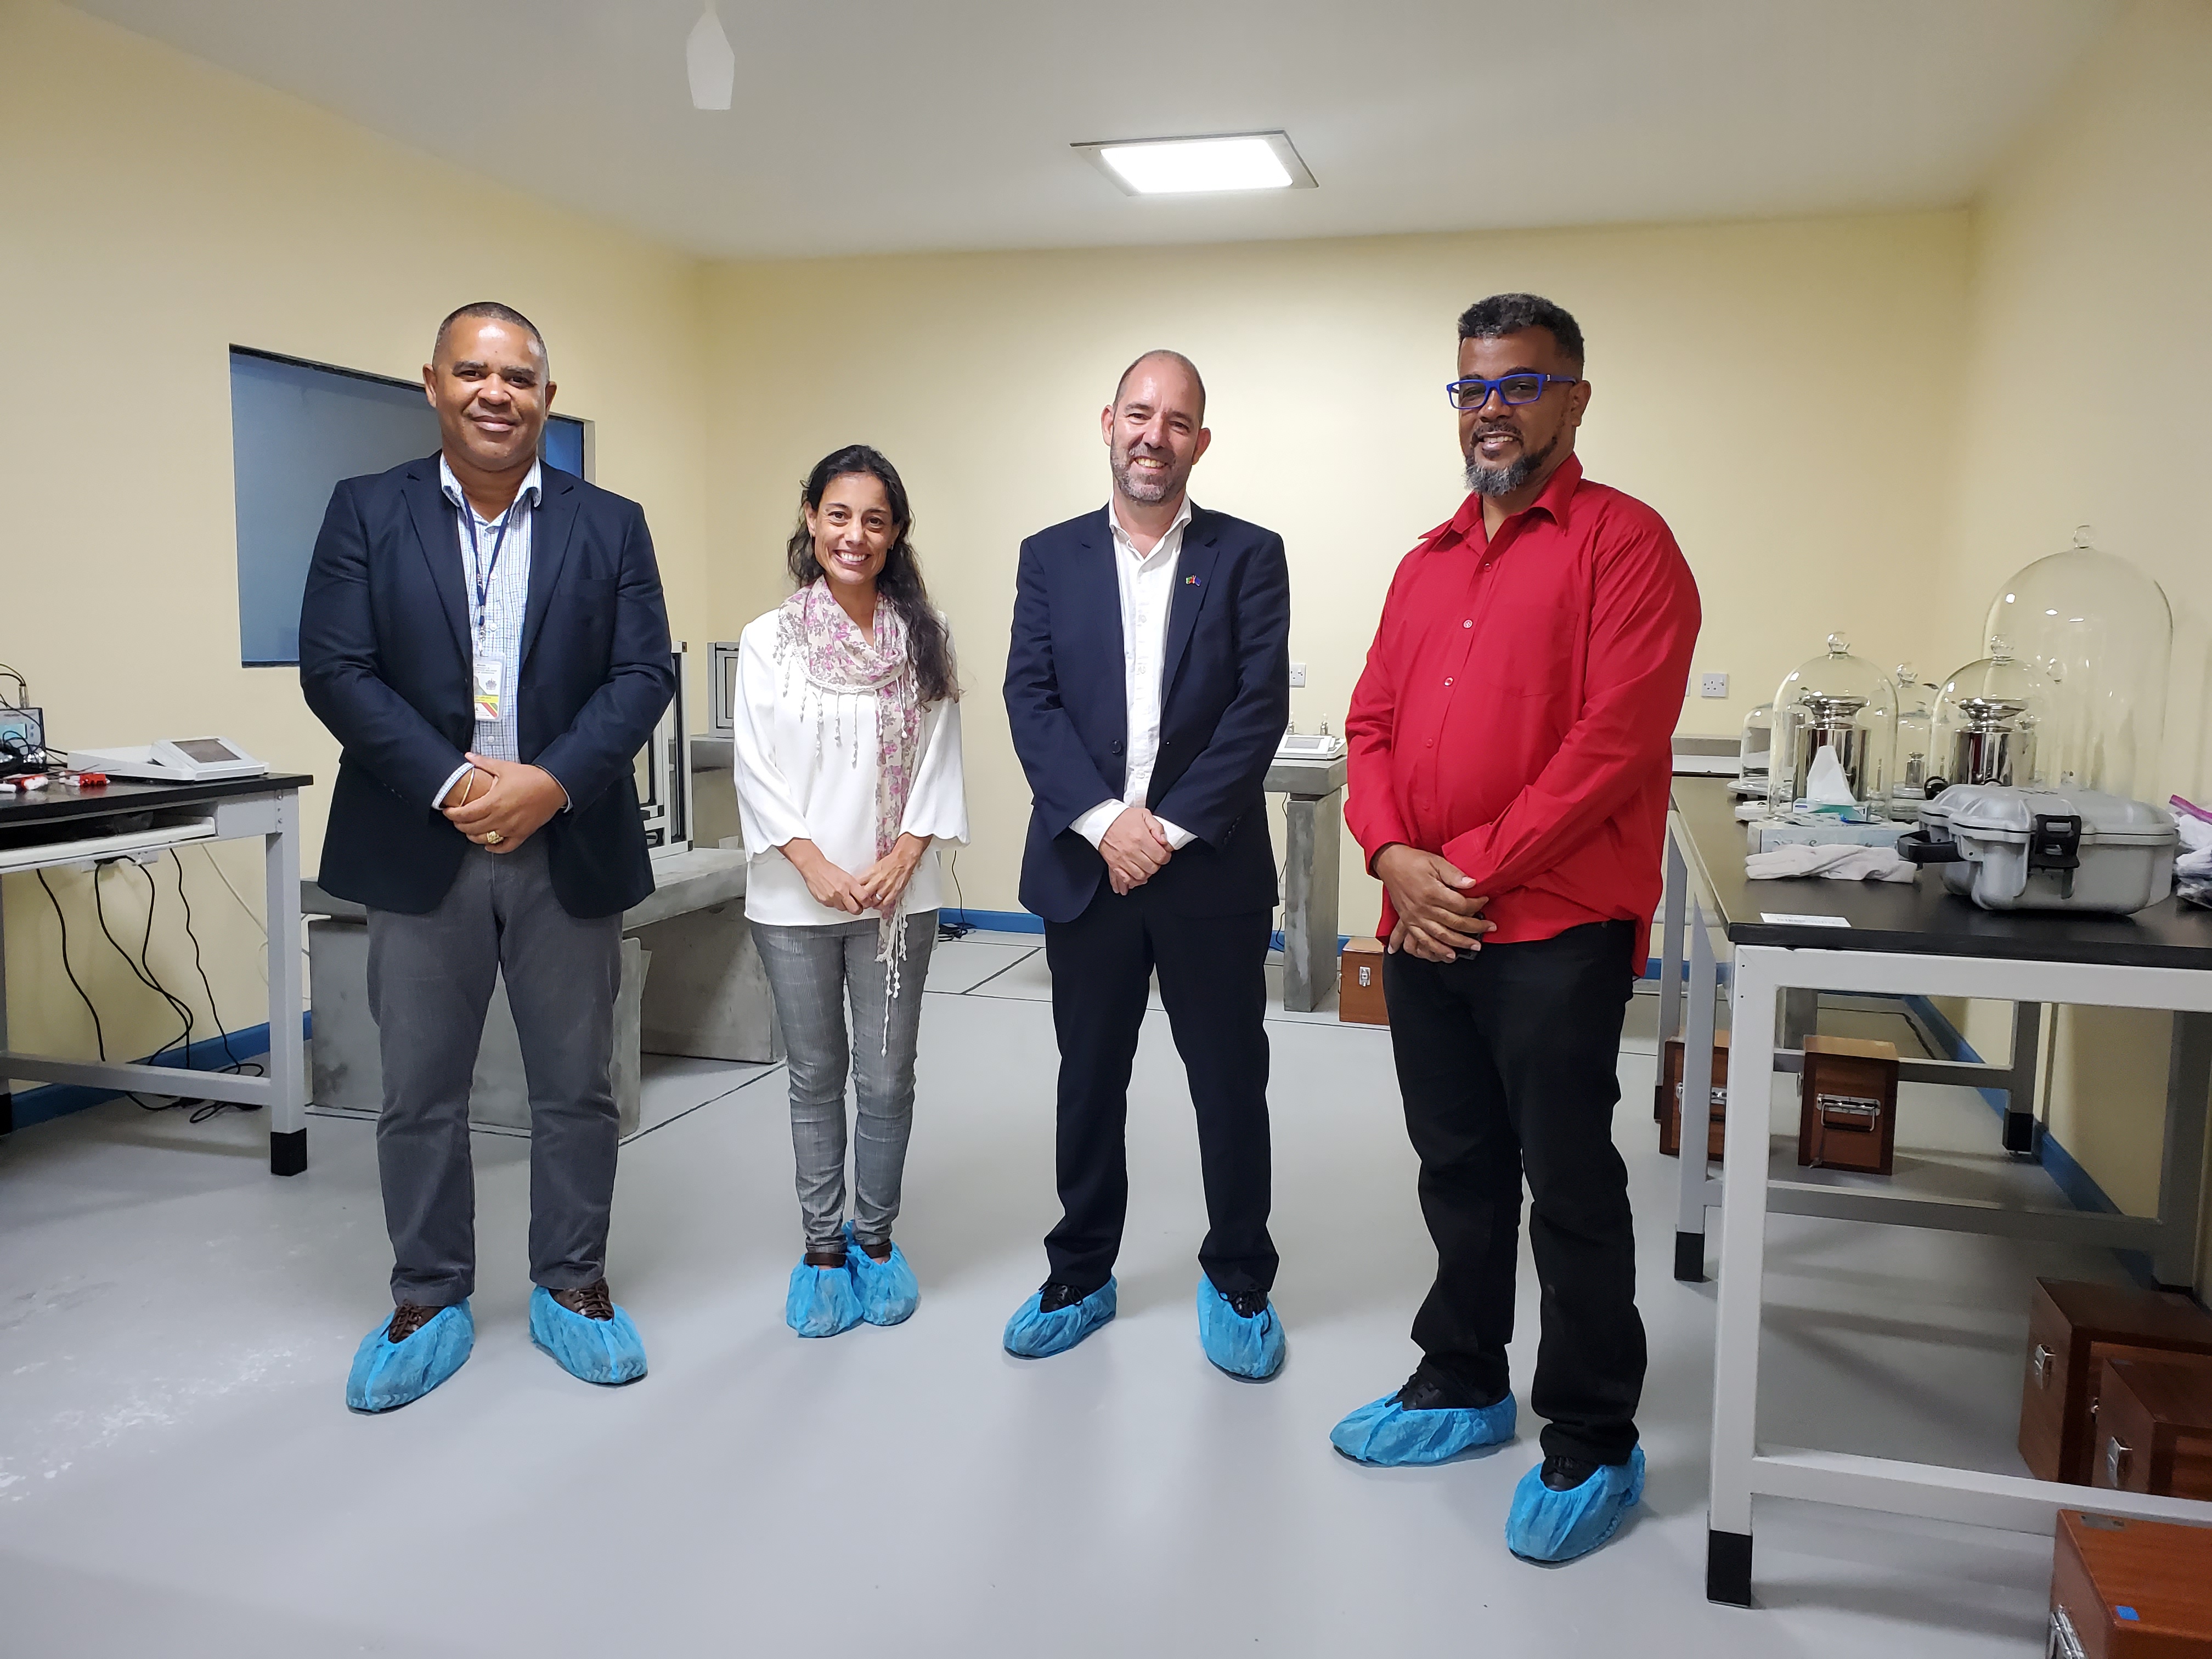 Delegation visits Saint Kitts and Nevis Metrology Lab to observe improvements supported by the EU and CDB